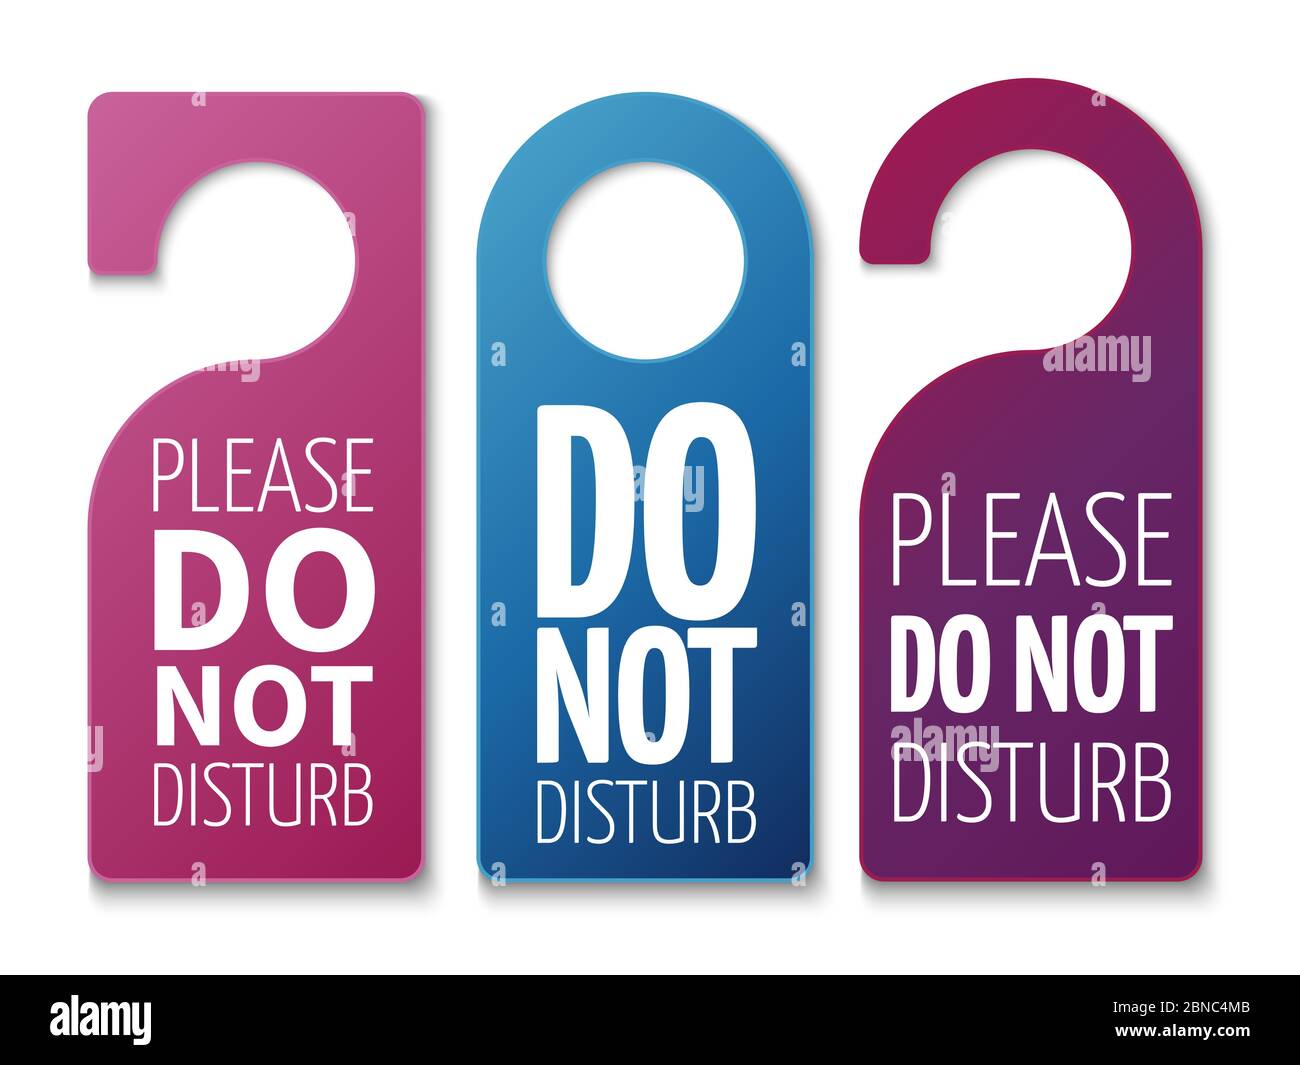 Do not disturb room vector signs. Colorful realistic hotel door hangers isolated on white background illustration Stock Vector